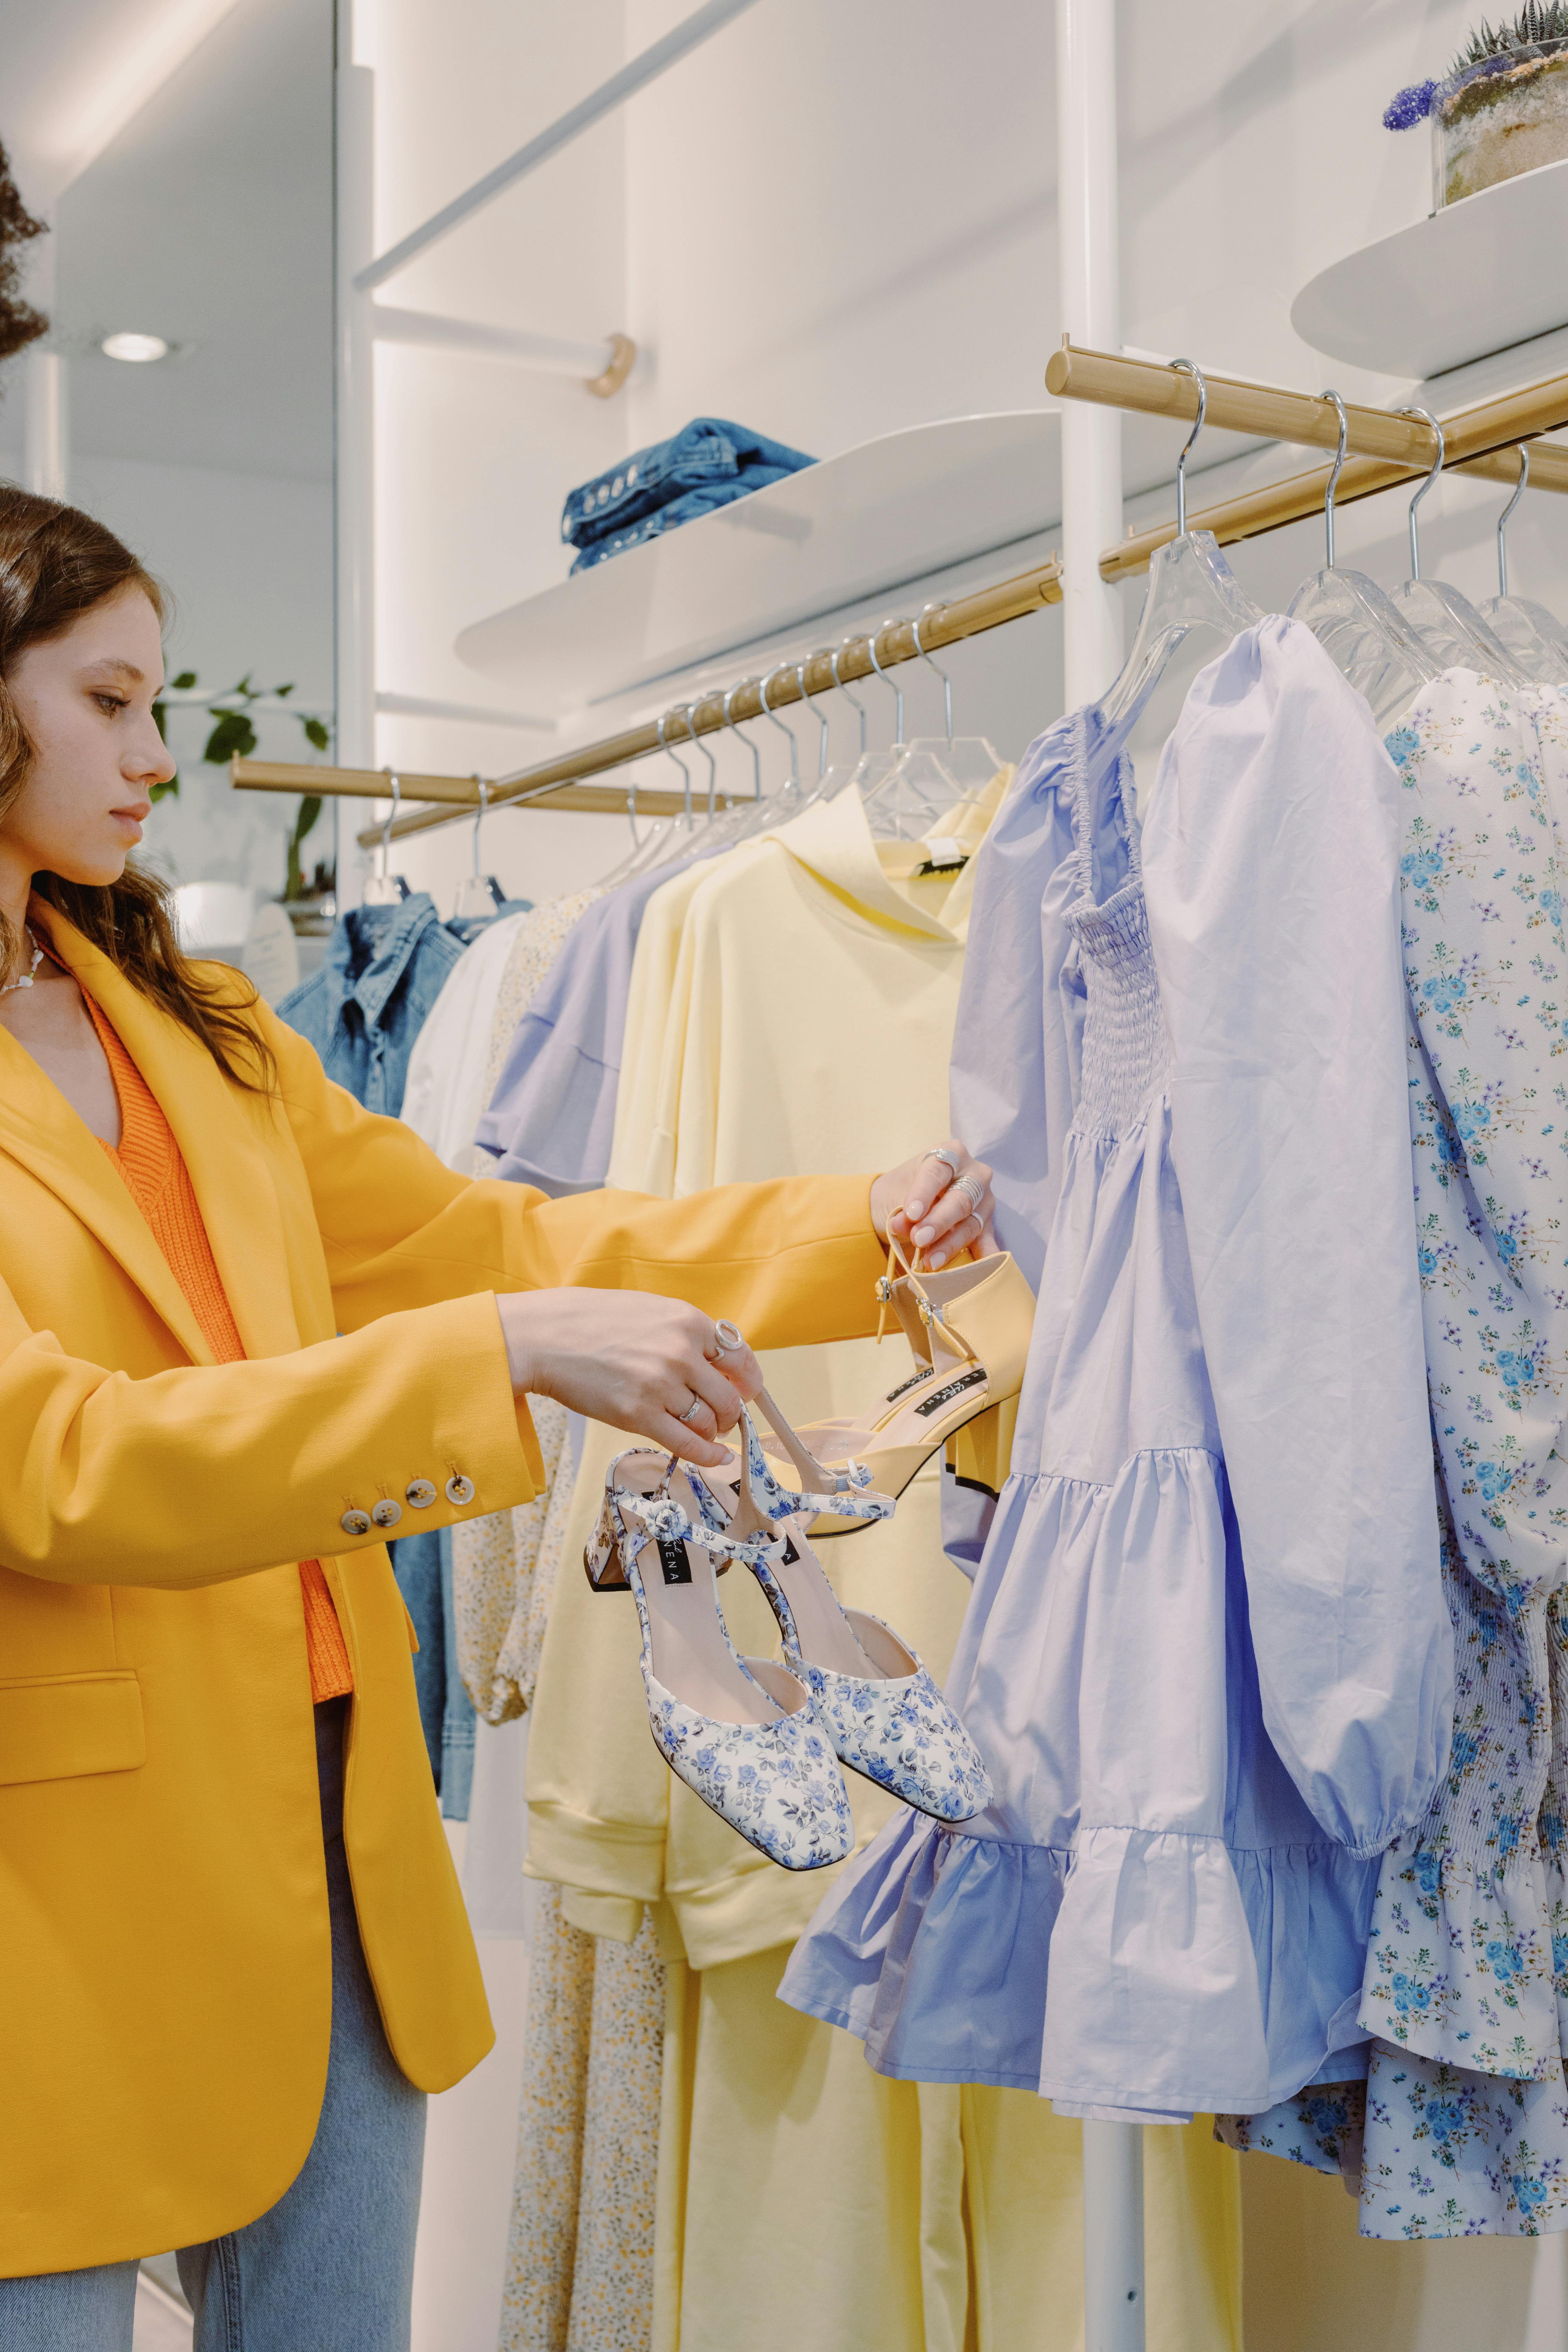 A woman shopping for dresses and shoes | Source: Pexels